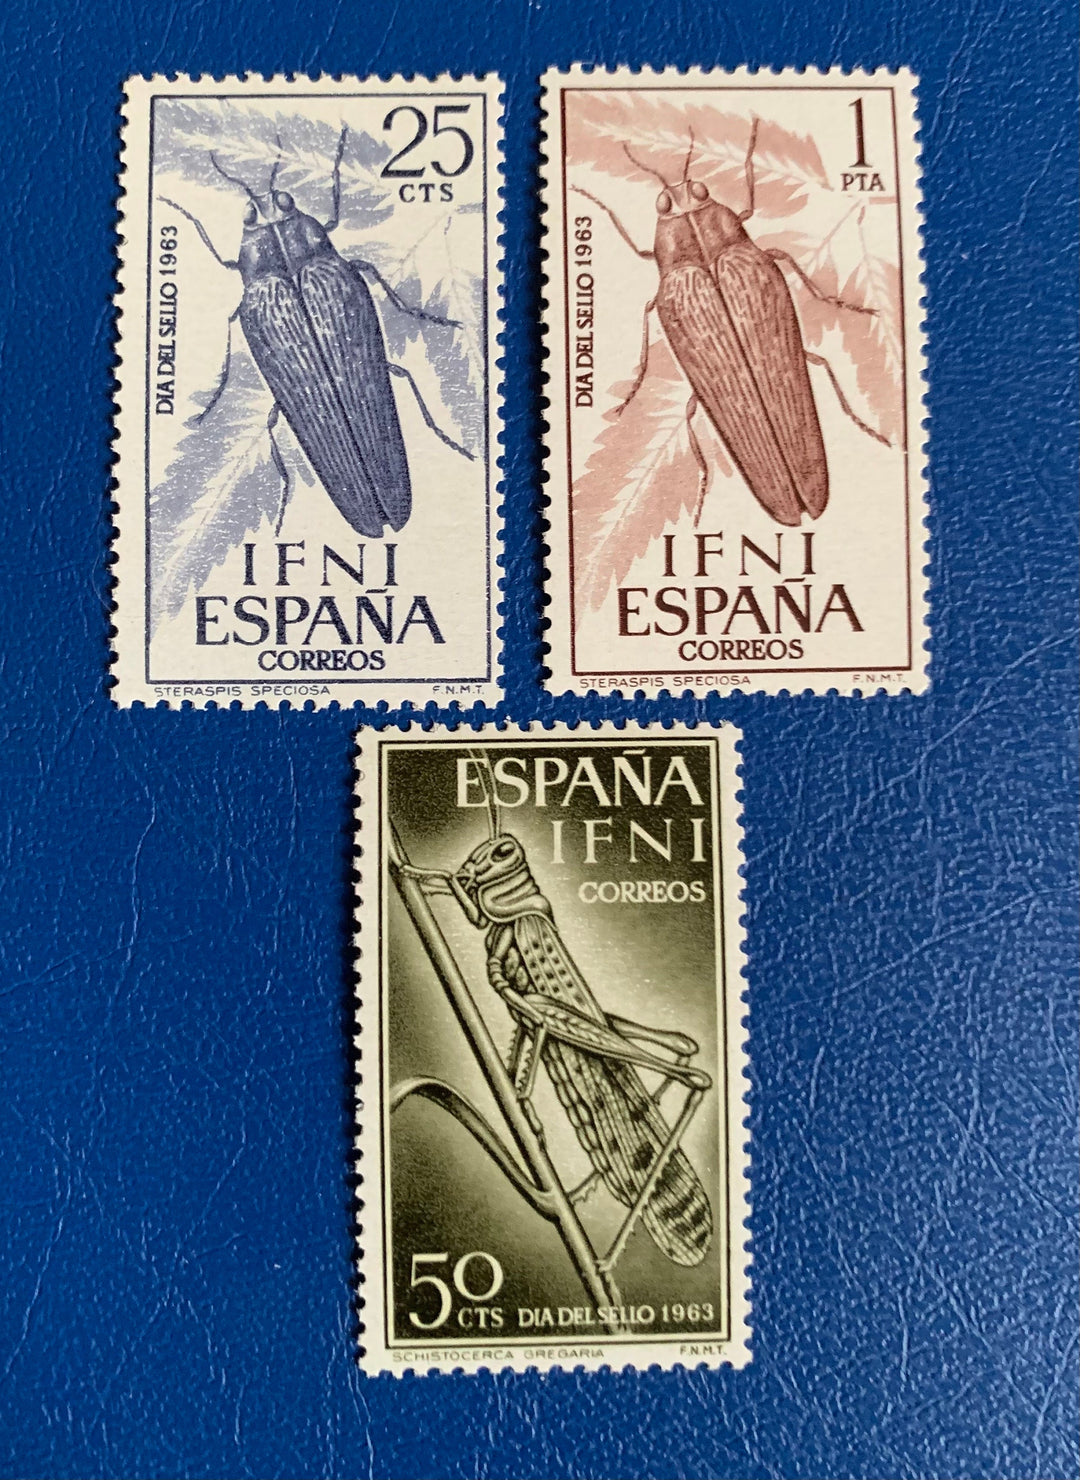 Sp. Ifni- Original Vintage Postage Stamps- 1963 - Stamp Day - Insects